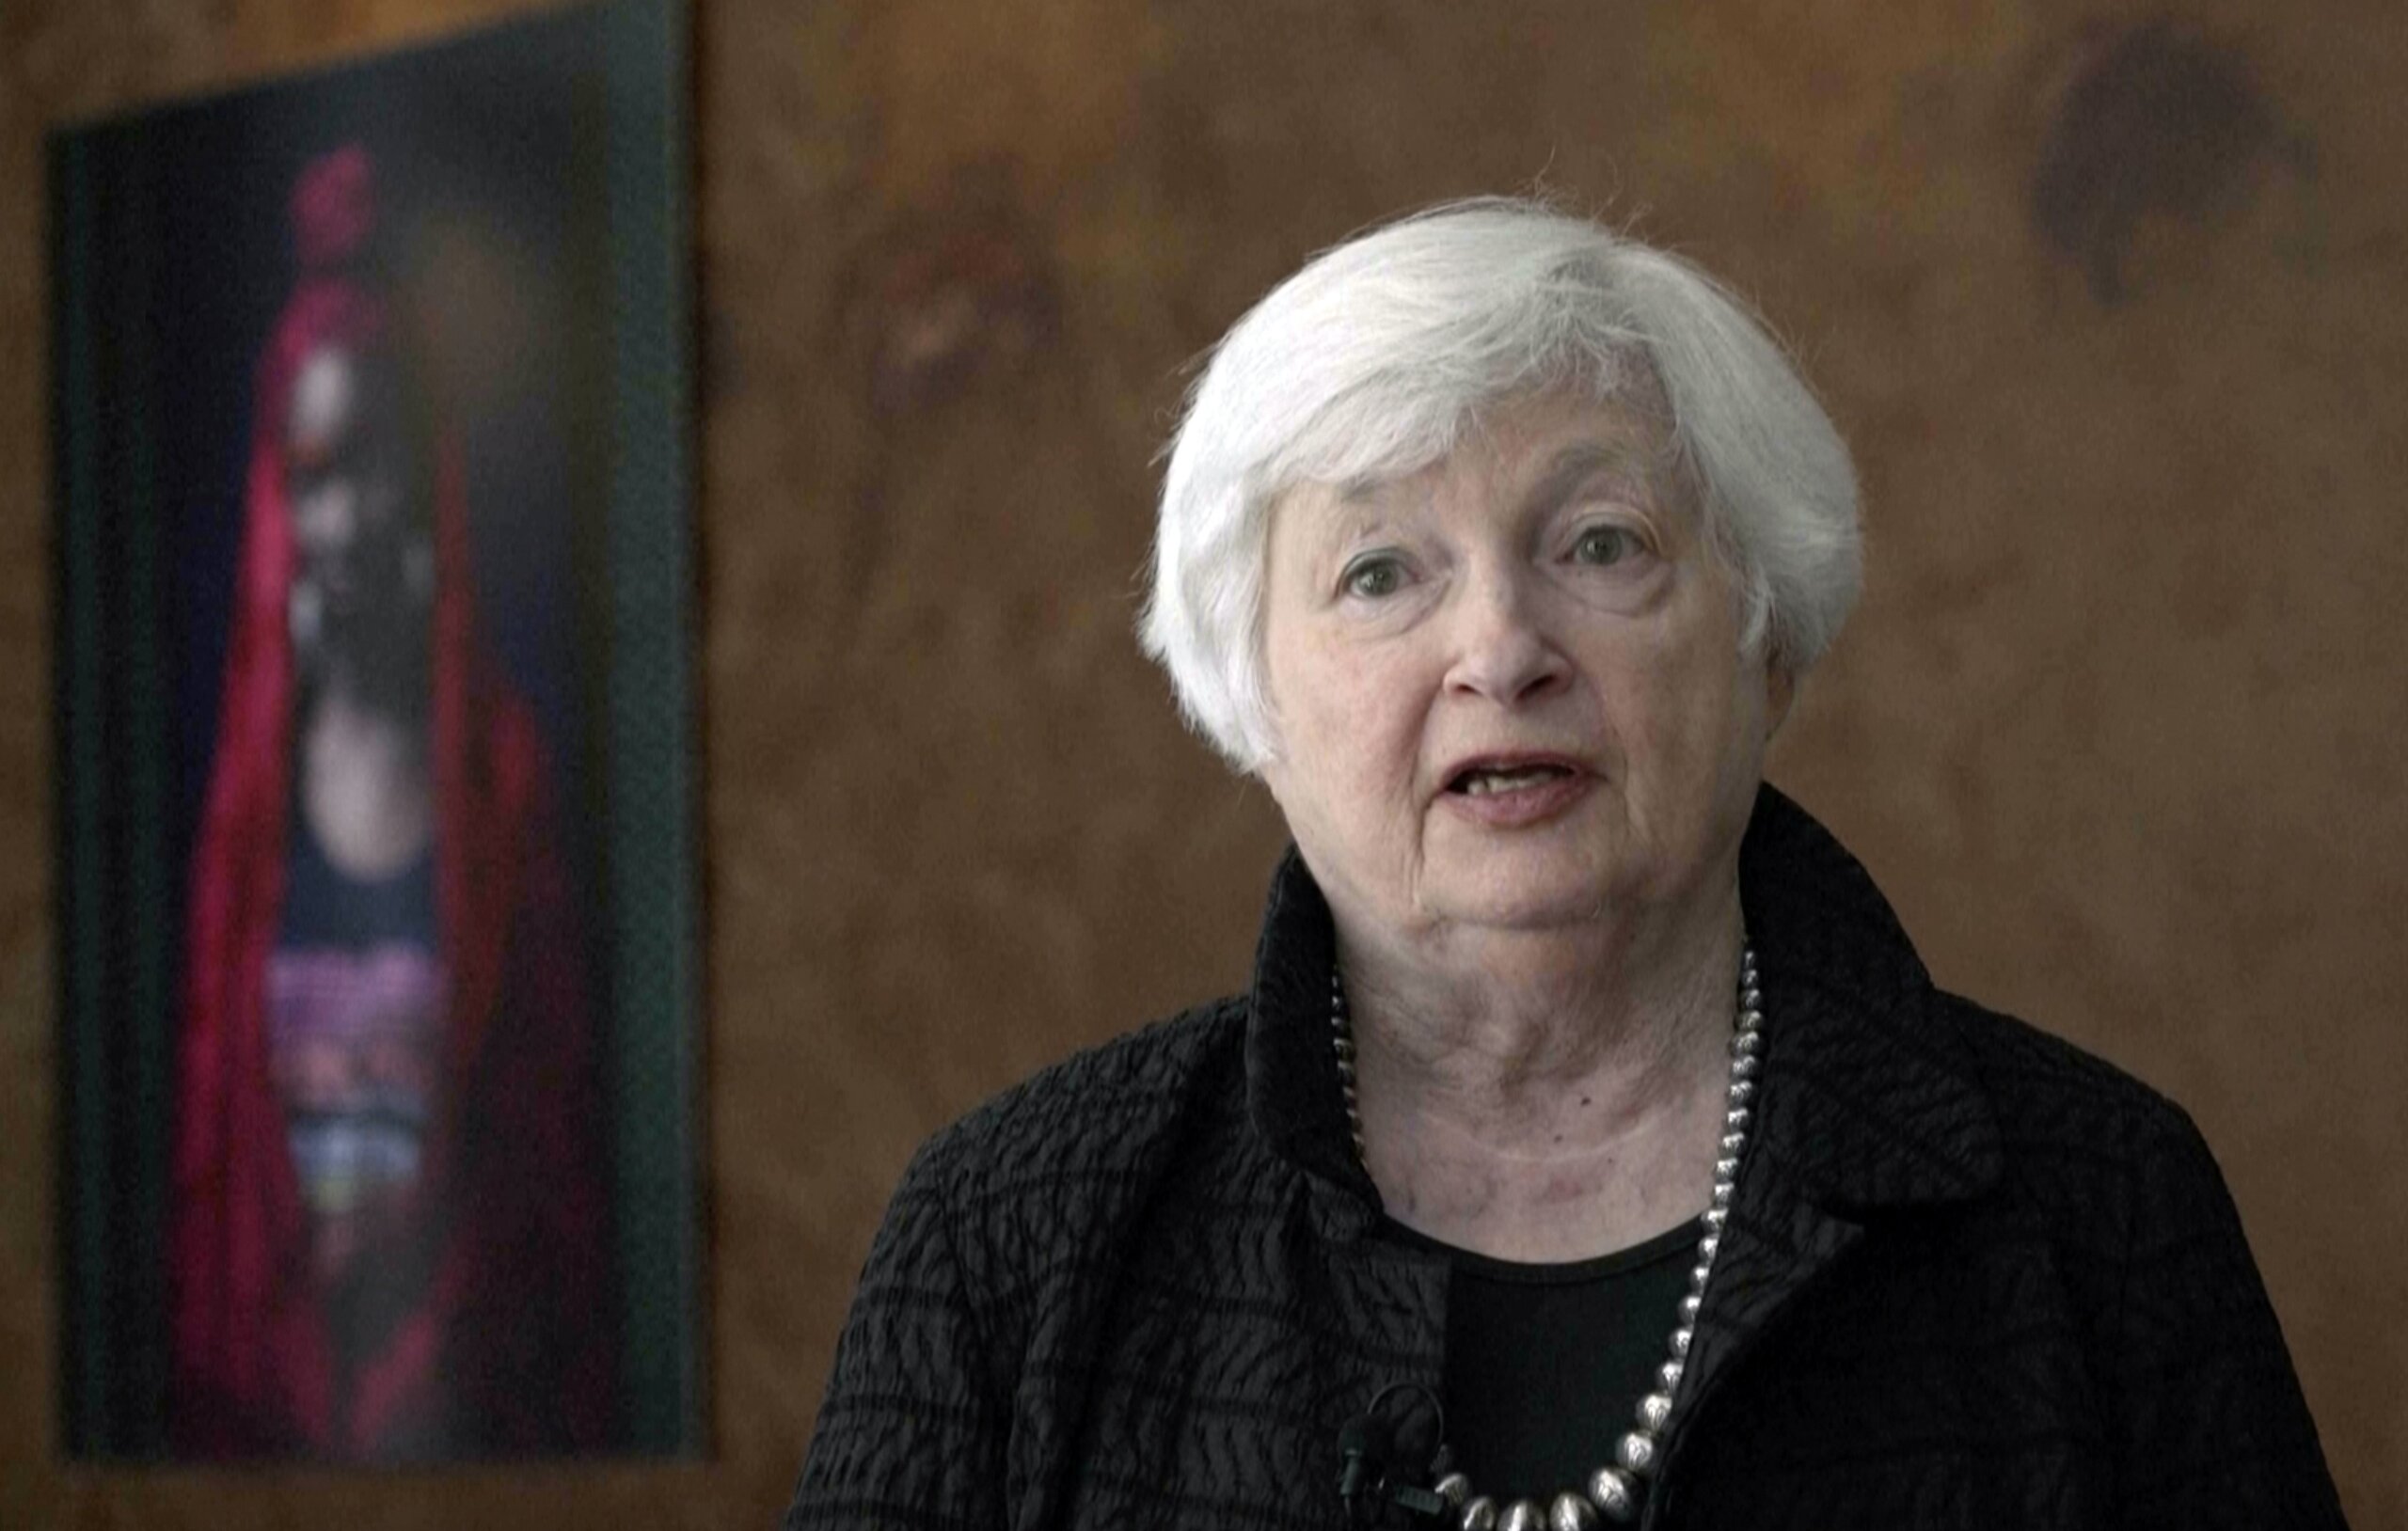 Yellen in Zambia to discuss debt to China, public health